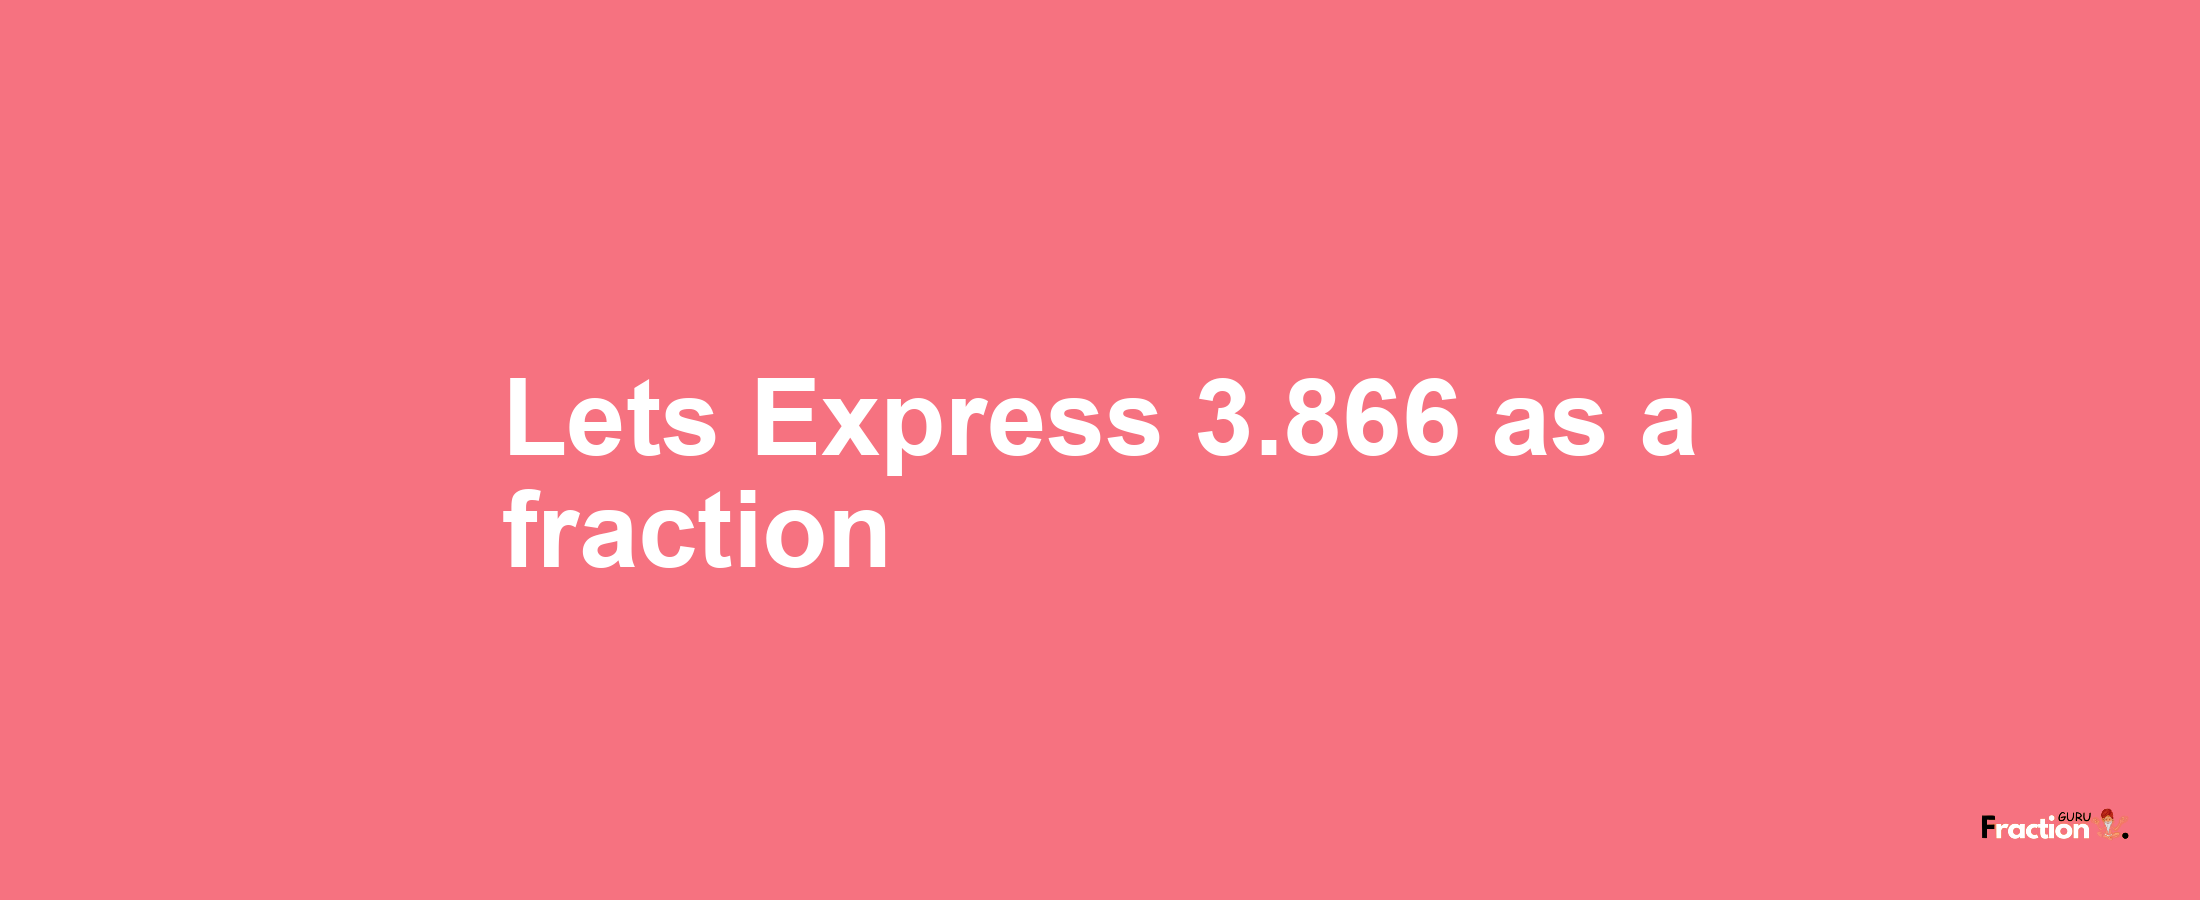 Lets Express 3.866 as afraction